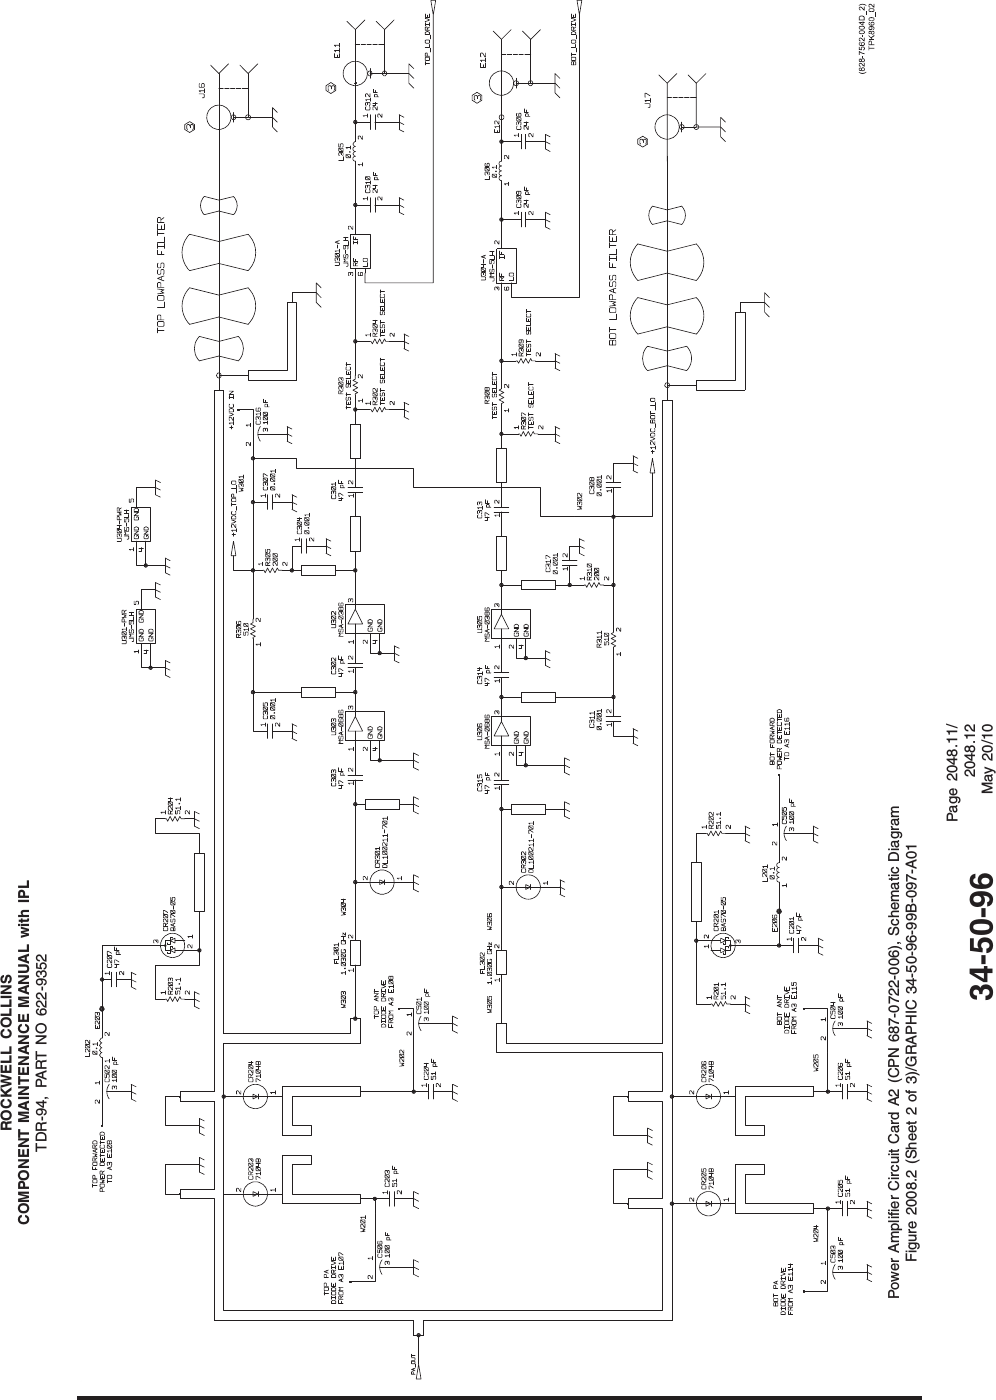 ROCKWELL COLLINSCOMPONENT MAINTENANCE MANUAL with IPLTDR-94, PART NO 622-9352Power Amplifier Circuit Card A2 (CPN 687-0722-006), Schematic DiagramFigure 2008.2 (Sheet 2 of 3)/GRAPHIC 34-50-96-99B-097-A0134-50-96Page 2048.11/2048.12May 20/10